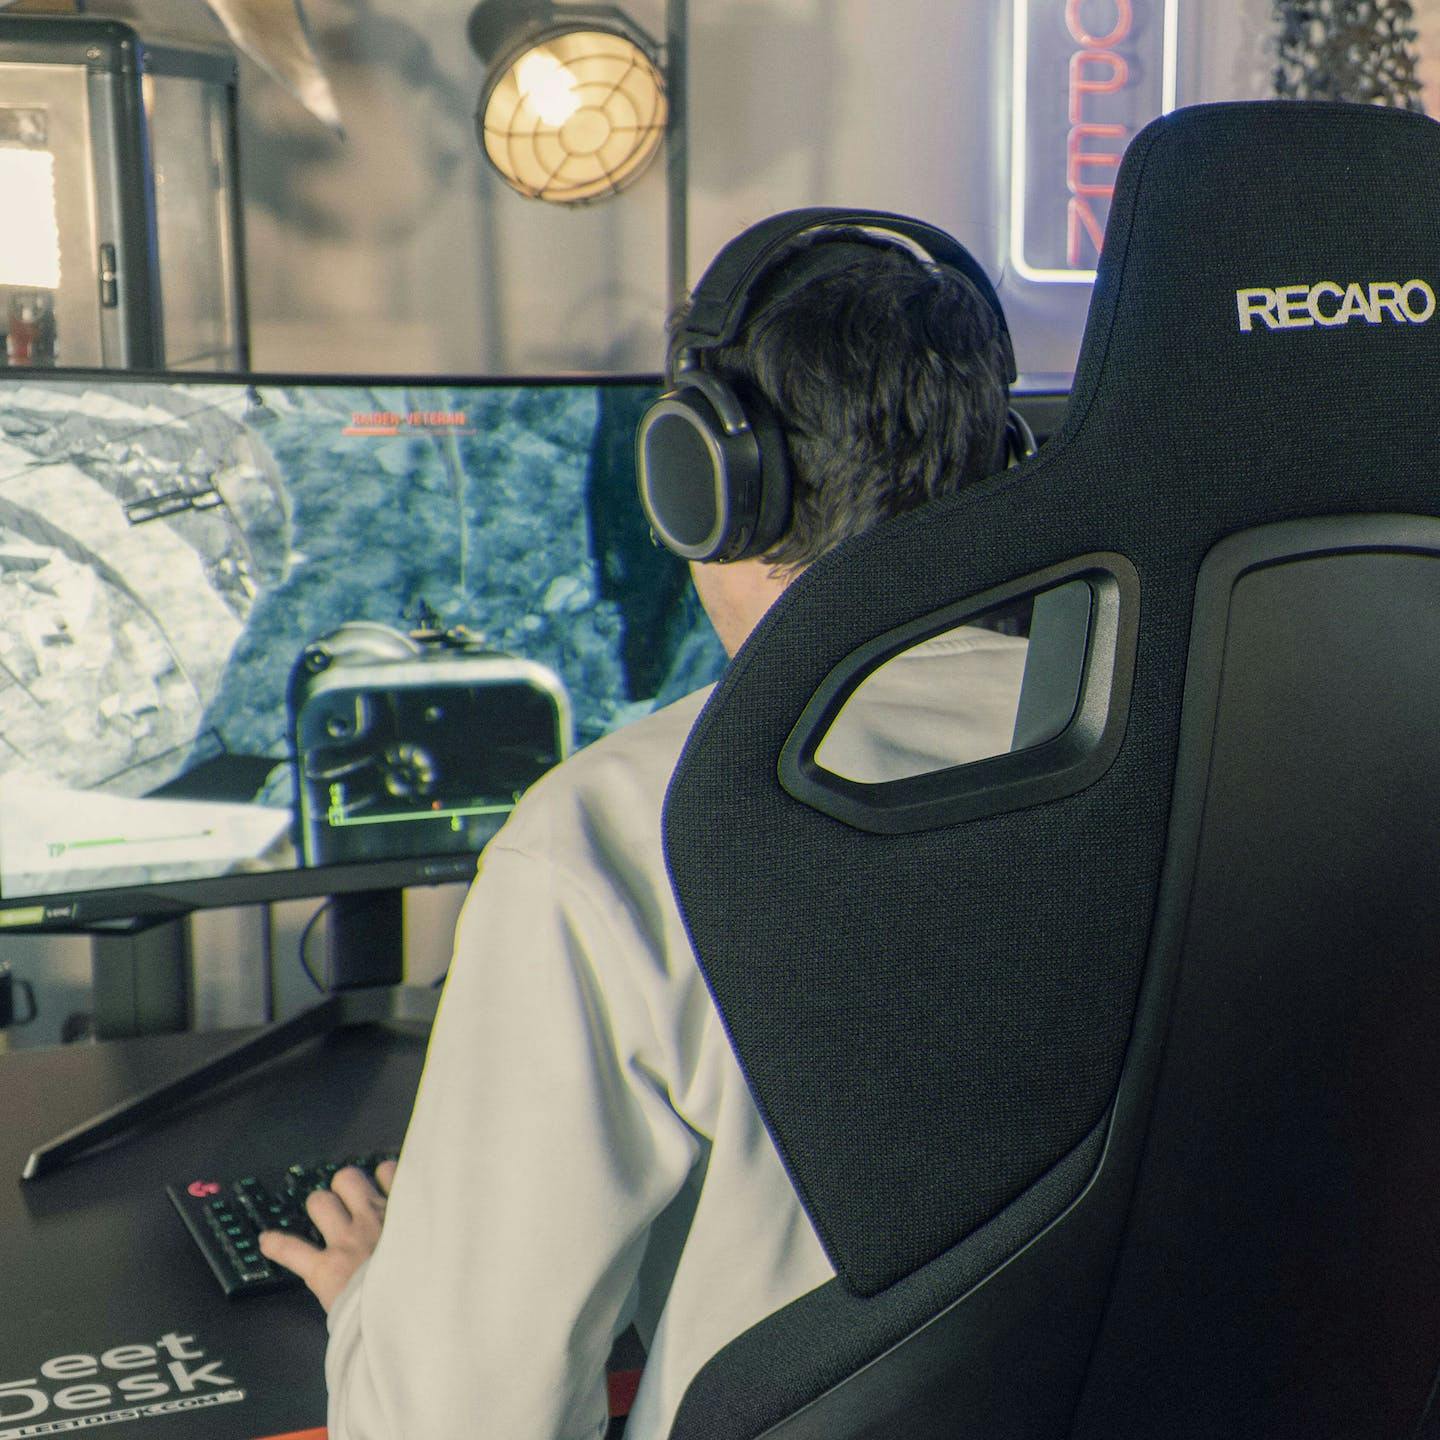 Gamer sits on a Recaro gaming chair at a LeetDesk gaming table, engrossed in a game.